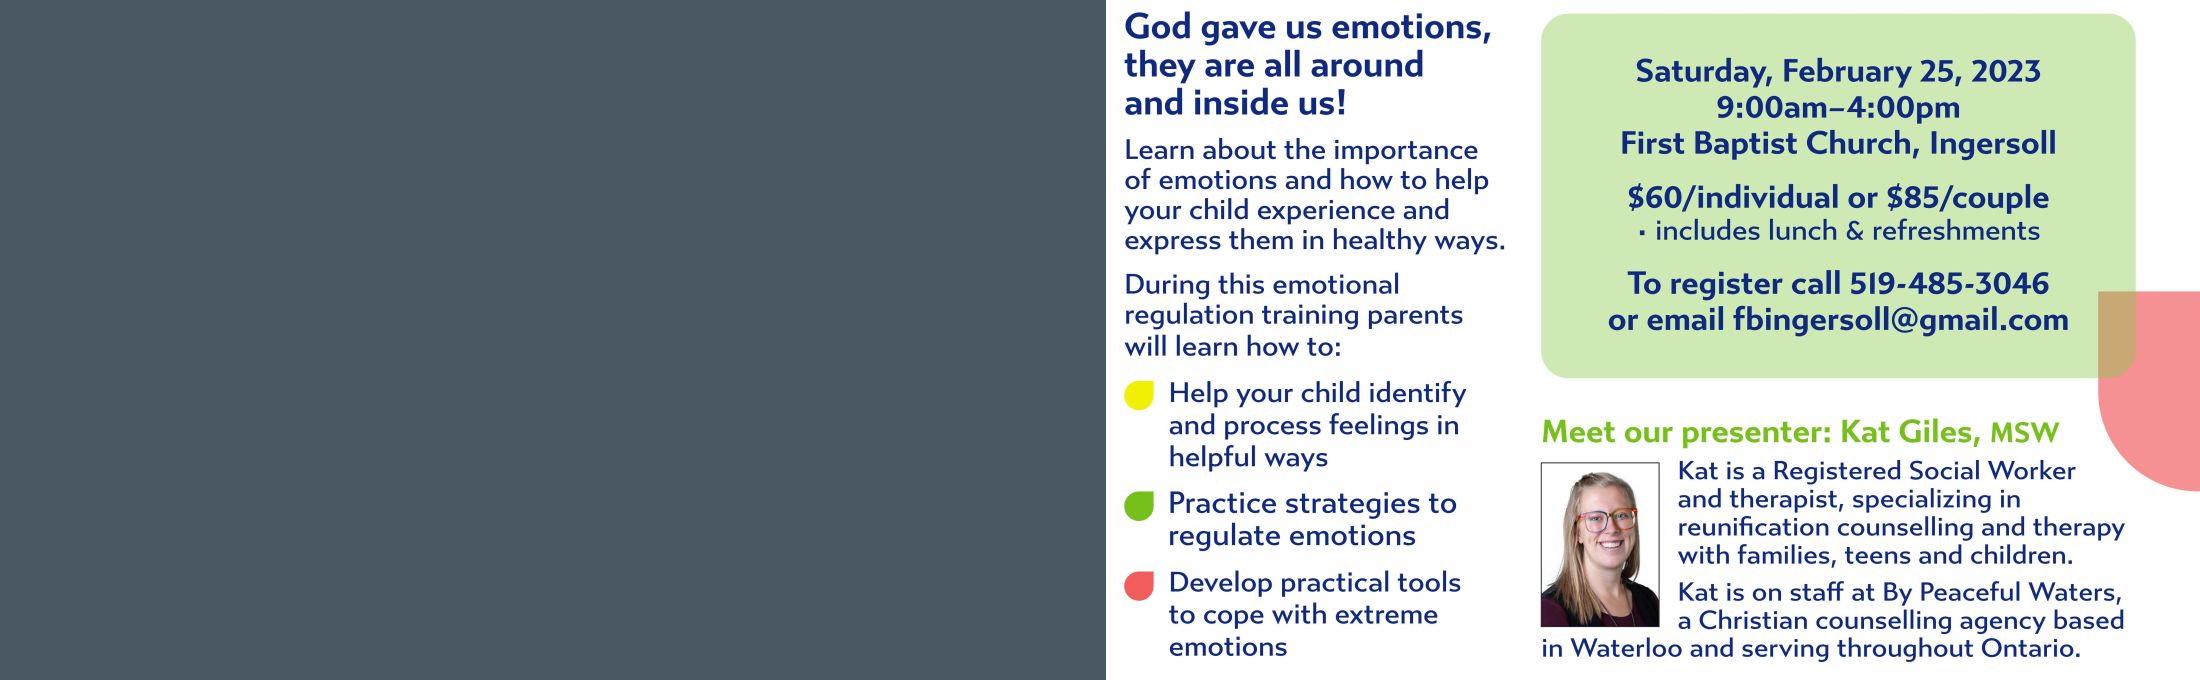 Emoticon Parent Workshop, Pg. 2 of 3 See event details opposite: - Practice strategies to regulate emotions - Develop practical tools to cope with extreme emotions - Help your child identify and process their feelings in helpful ways